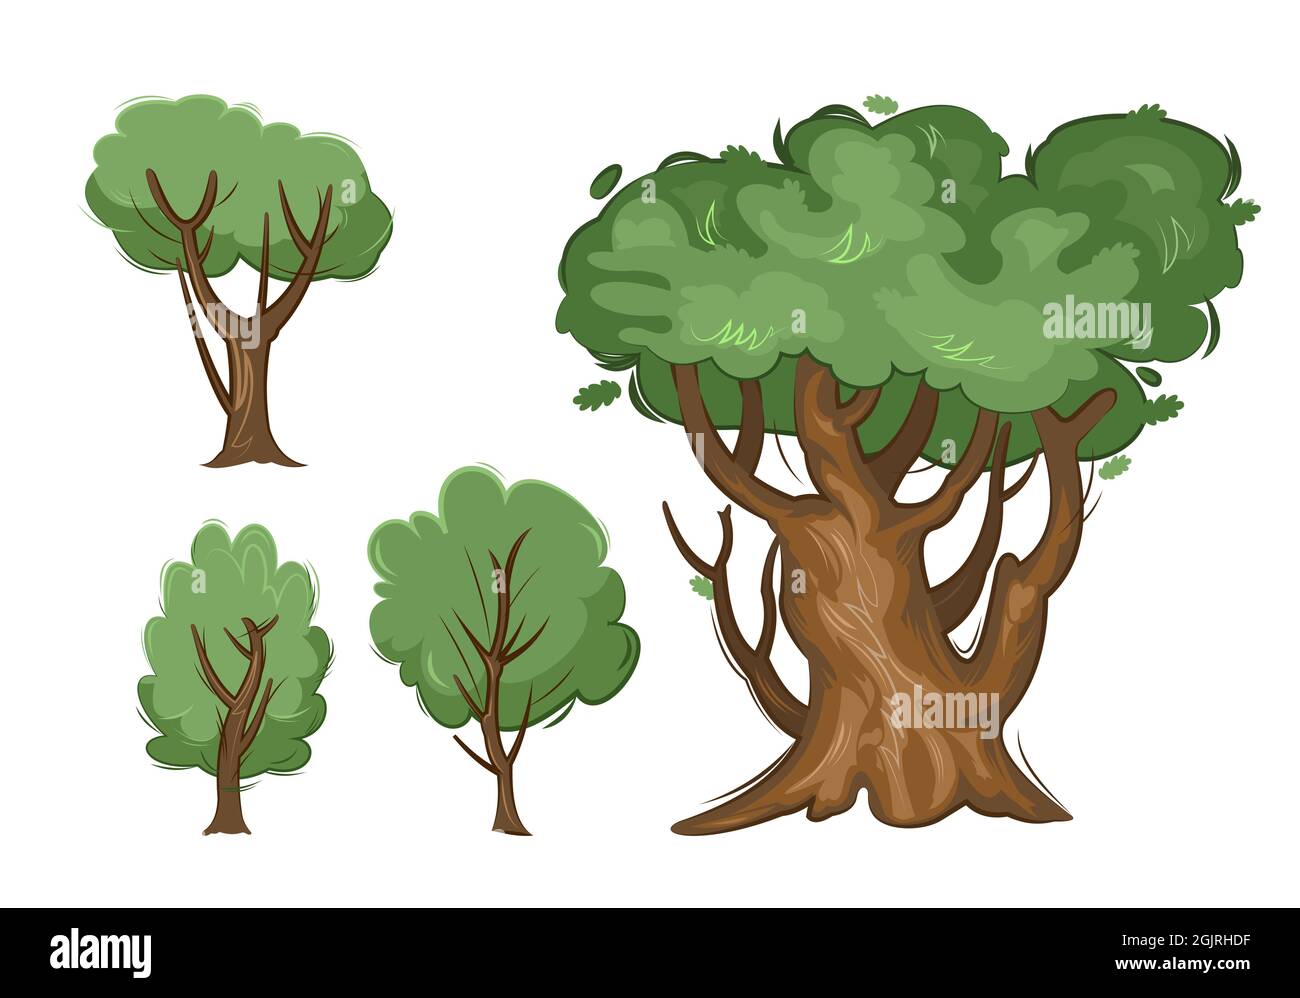 Summer trees and bushes set. Oak. Adult and young green plants. Objects are isolated on a white background. Beautiful thin and graceful. Flat style Stock Vector